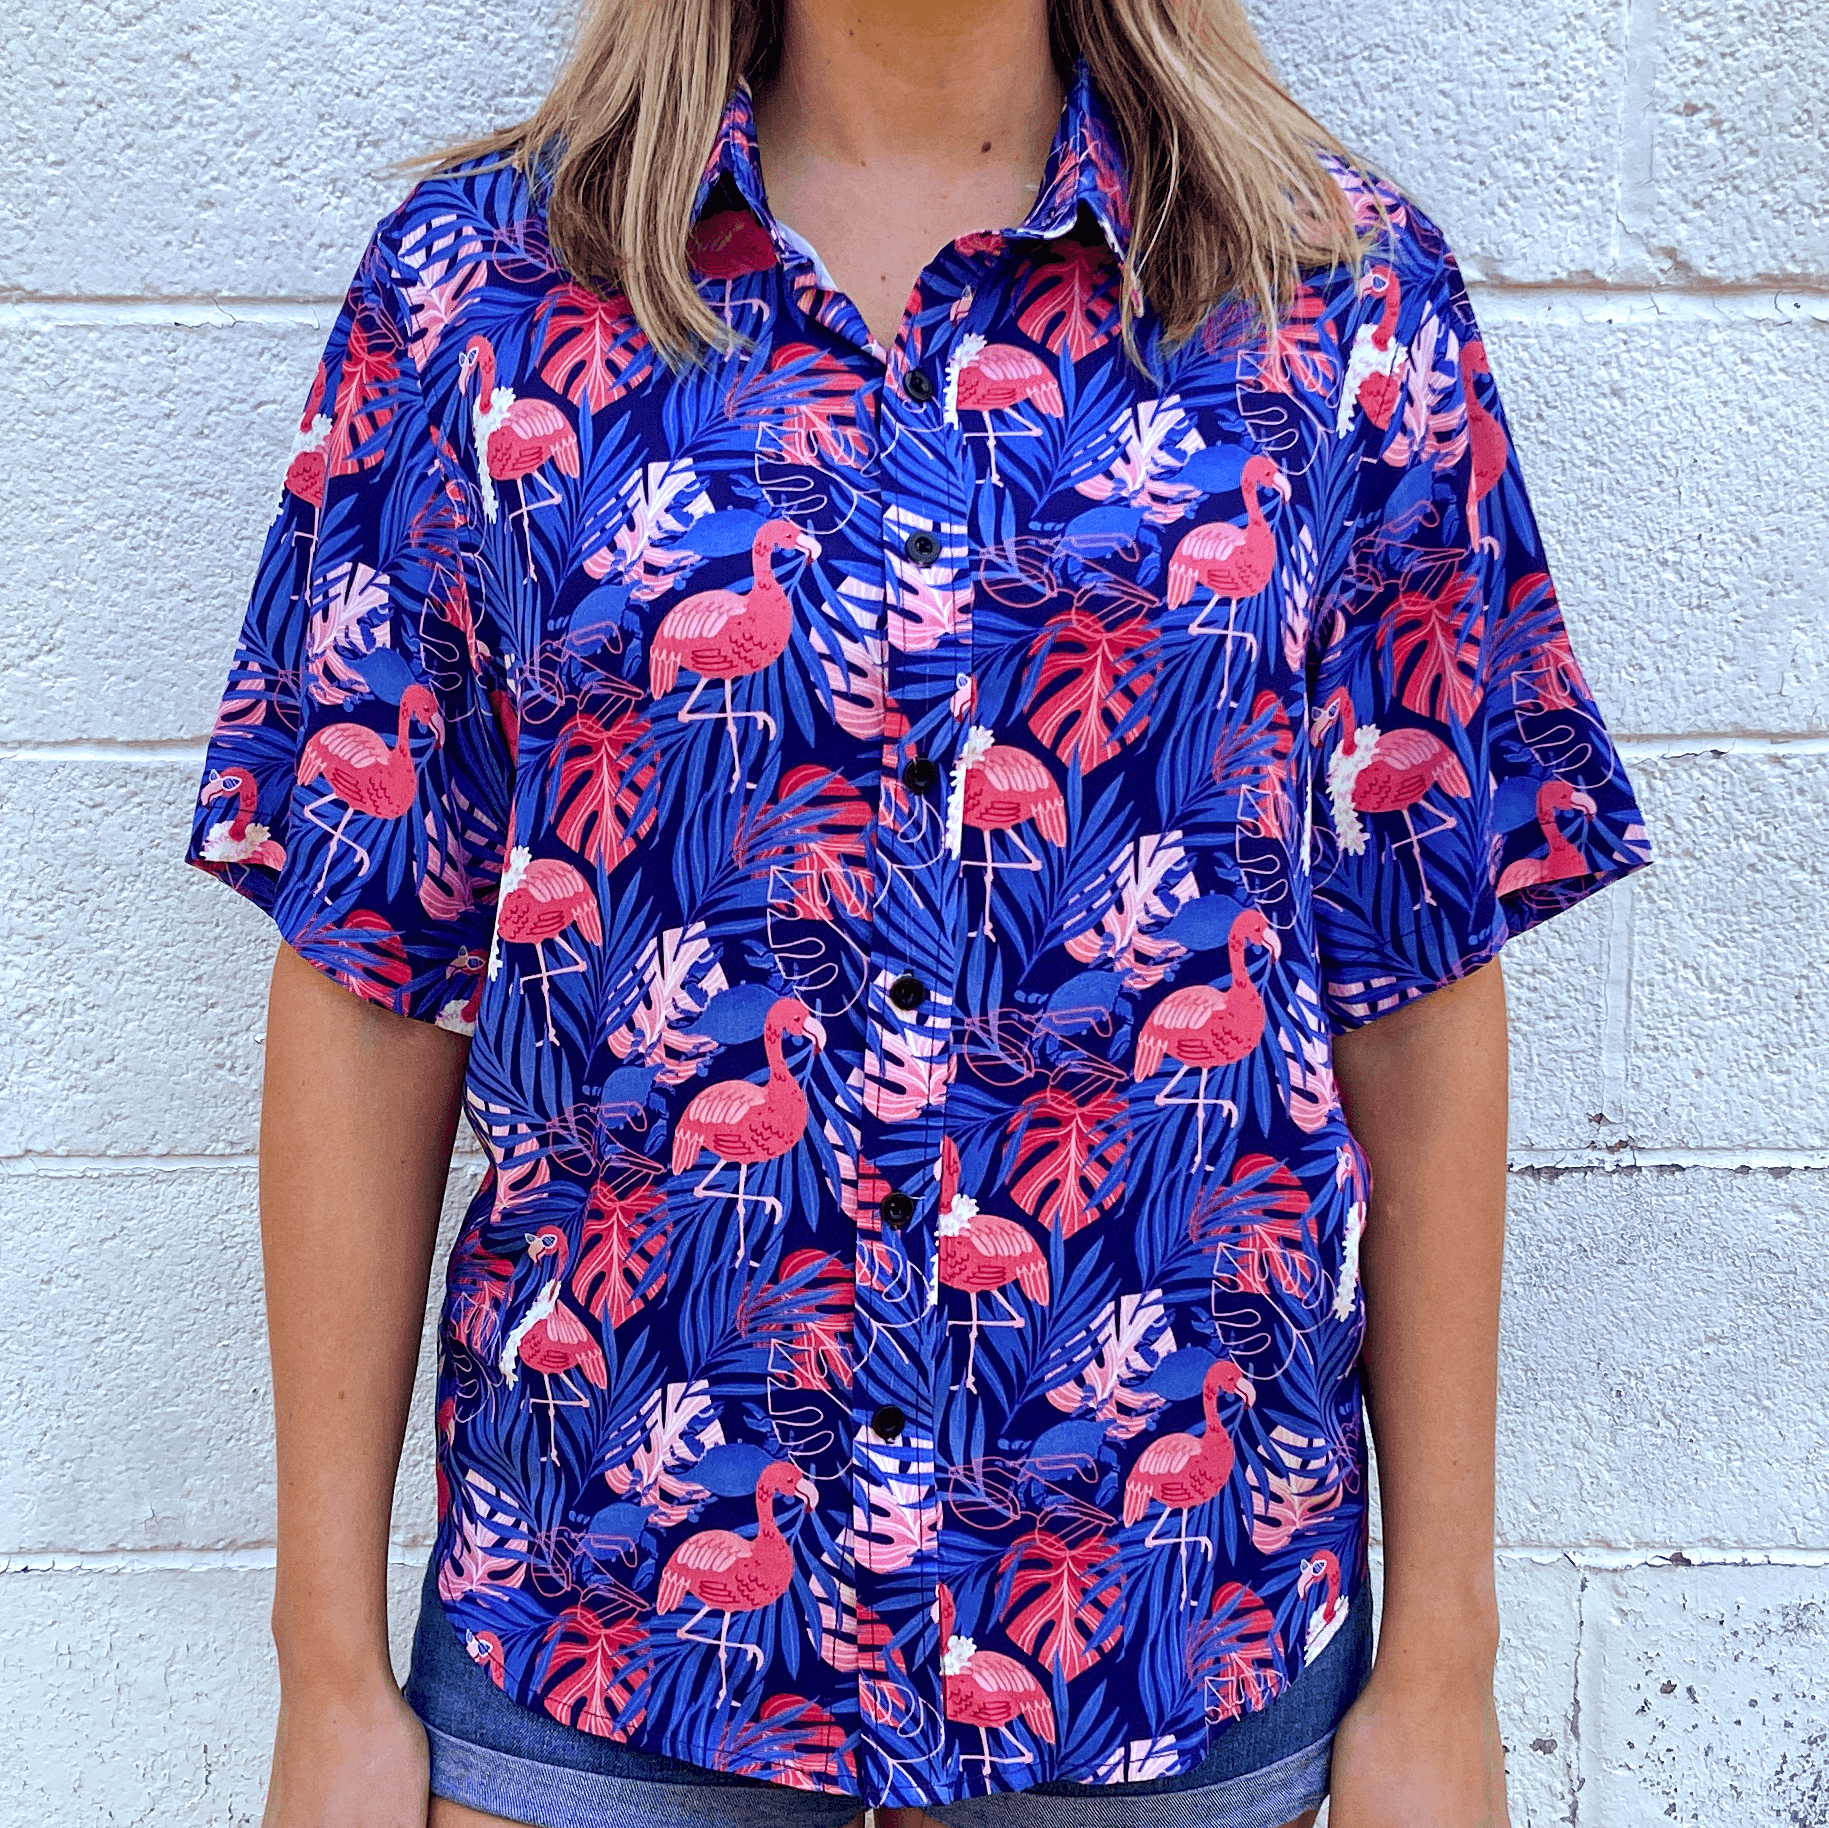 *PRE-ORDER* Ready to Flamingle (Blue) / Hawaiian Shirt (Estimated Ship Date June 25) - Route One Apparel